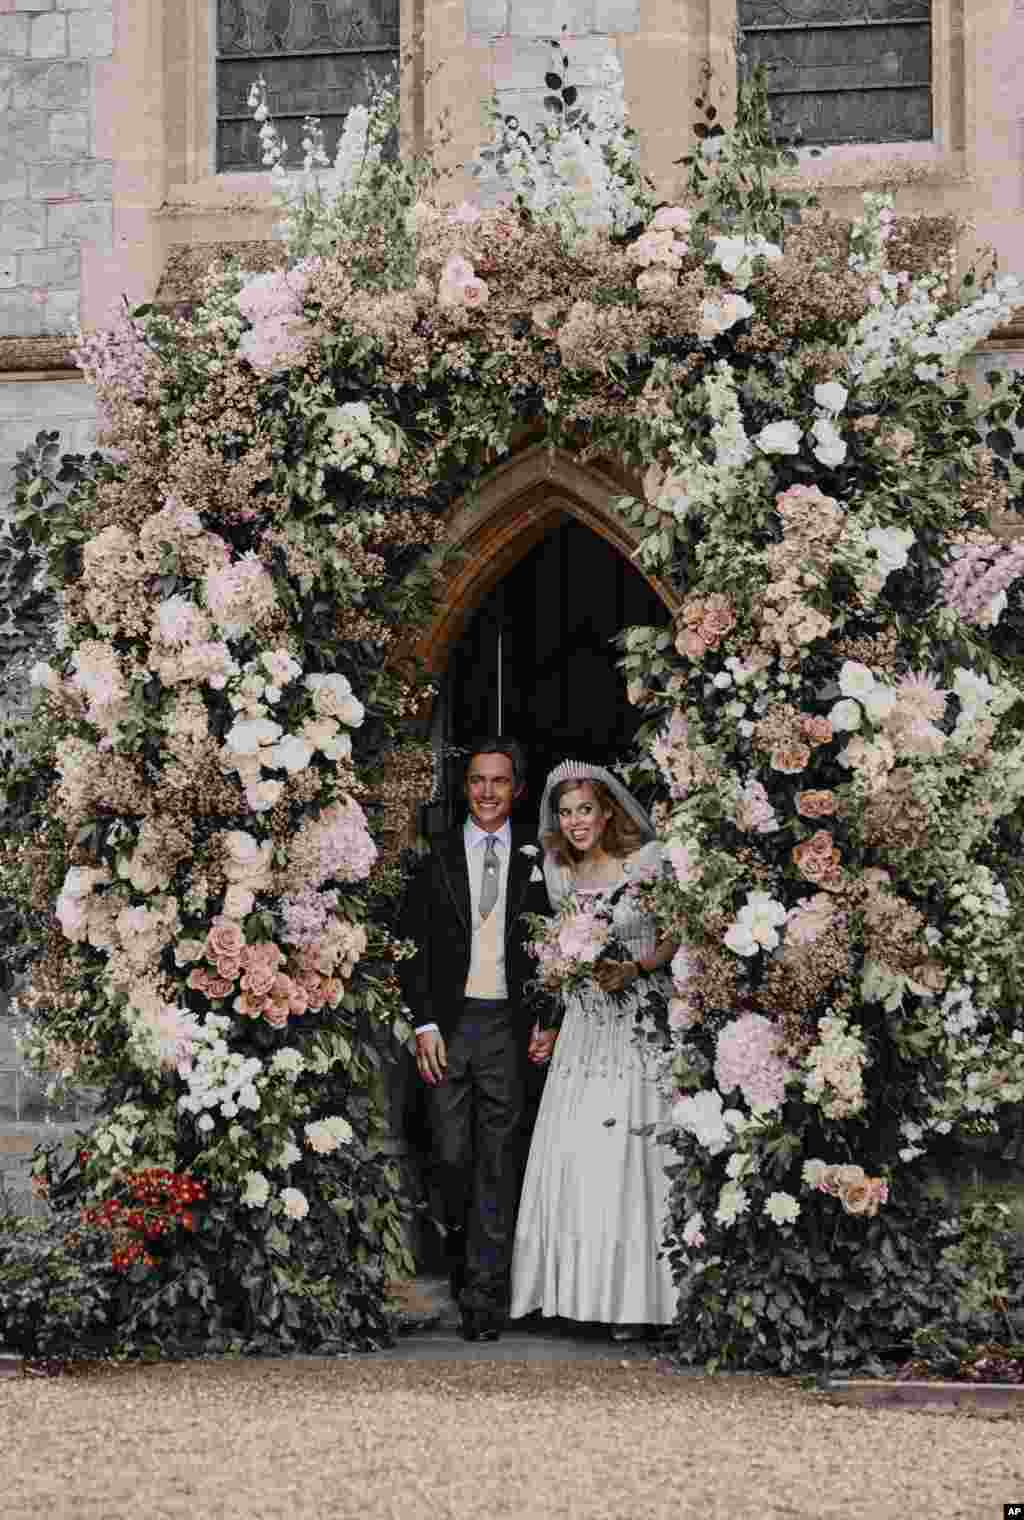 In this photograph released by the Royal Communications of Princess Beatrice and Edoardo Mapelli Mozzi, Britain&#39;s Princess Beatrice and Edoardo Mapelli Mozzi stand in the doorway of The Royal Chapel of All Saints at Royal Lodge, Windsor, England, after their wedding, July 18, 2020. Princess Beatrice wore a vintage dress loaned to her by Queen Elizabeth II at her wedding, Buckingham Palace said.